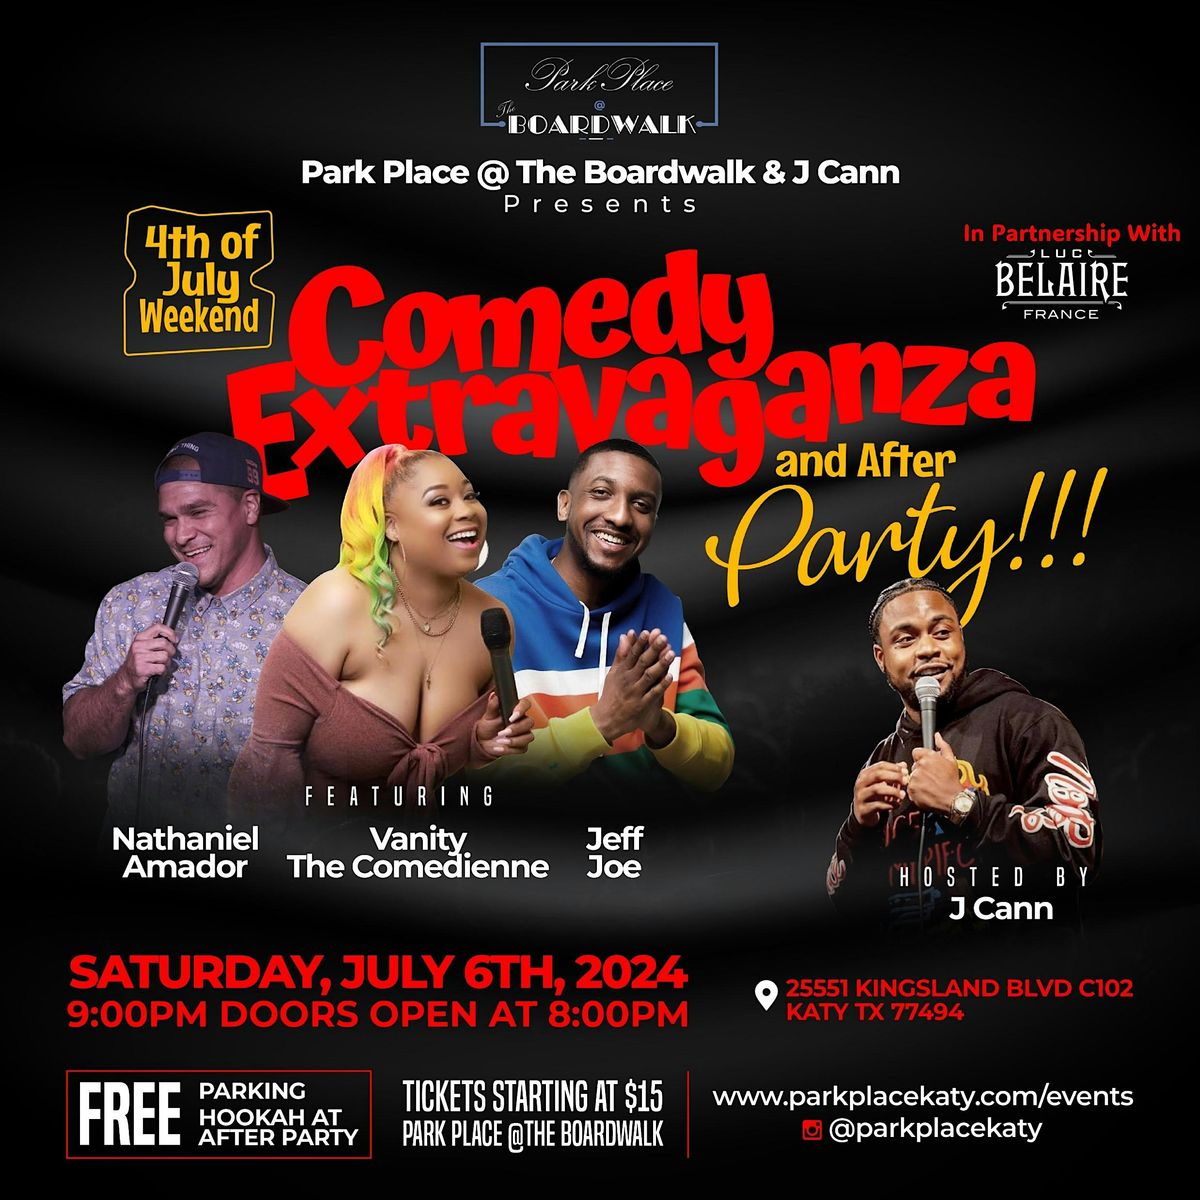 4th of July Weekend Comedy Extravaganza